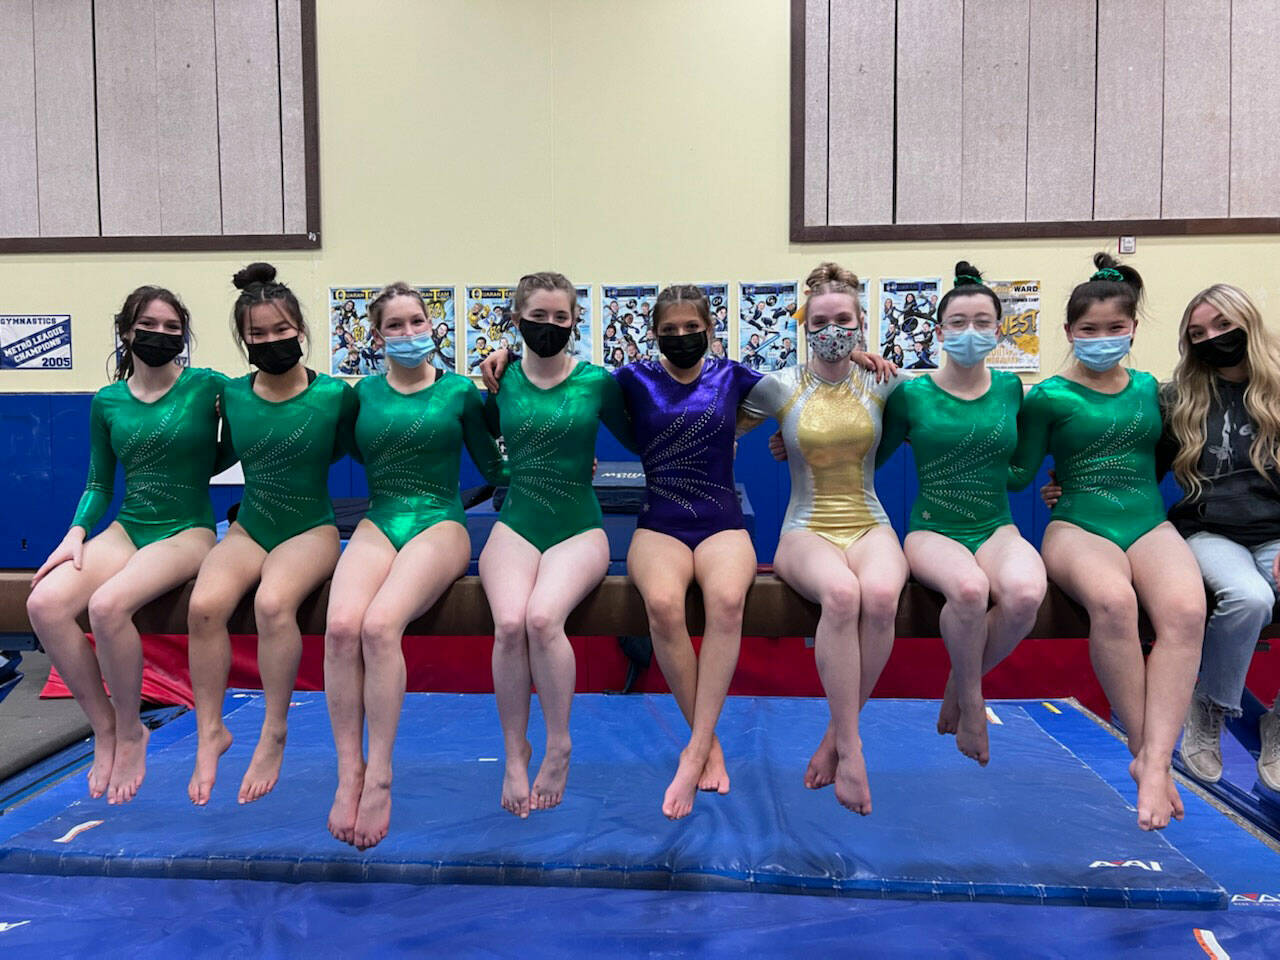 The combined Sequim-Port Angeles-Crescent gymnastics team for 2021-2022 includes, from left, Maddie Adams, Lum Fu, Kathryn Jones and Faith Carr, of Port Angeles, Sequim’s Ellie Turner, Crescent’s Aubrie Scott, Port Angeles’ Jessamyn Schindler and Mei-Ying Harper-Smith, and Sequim’s Susannah Sharp. Not pictured are Sequim’s Amara Brown, Kori Miller, Danica Pierson and Alex Schmadeke, and Port Angeles’ Alezandra Fitzsimmons. Submitted photo